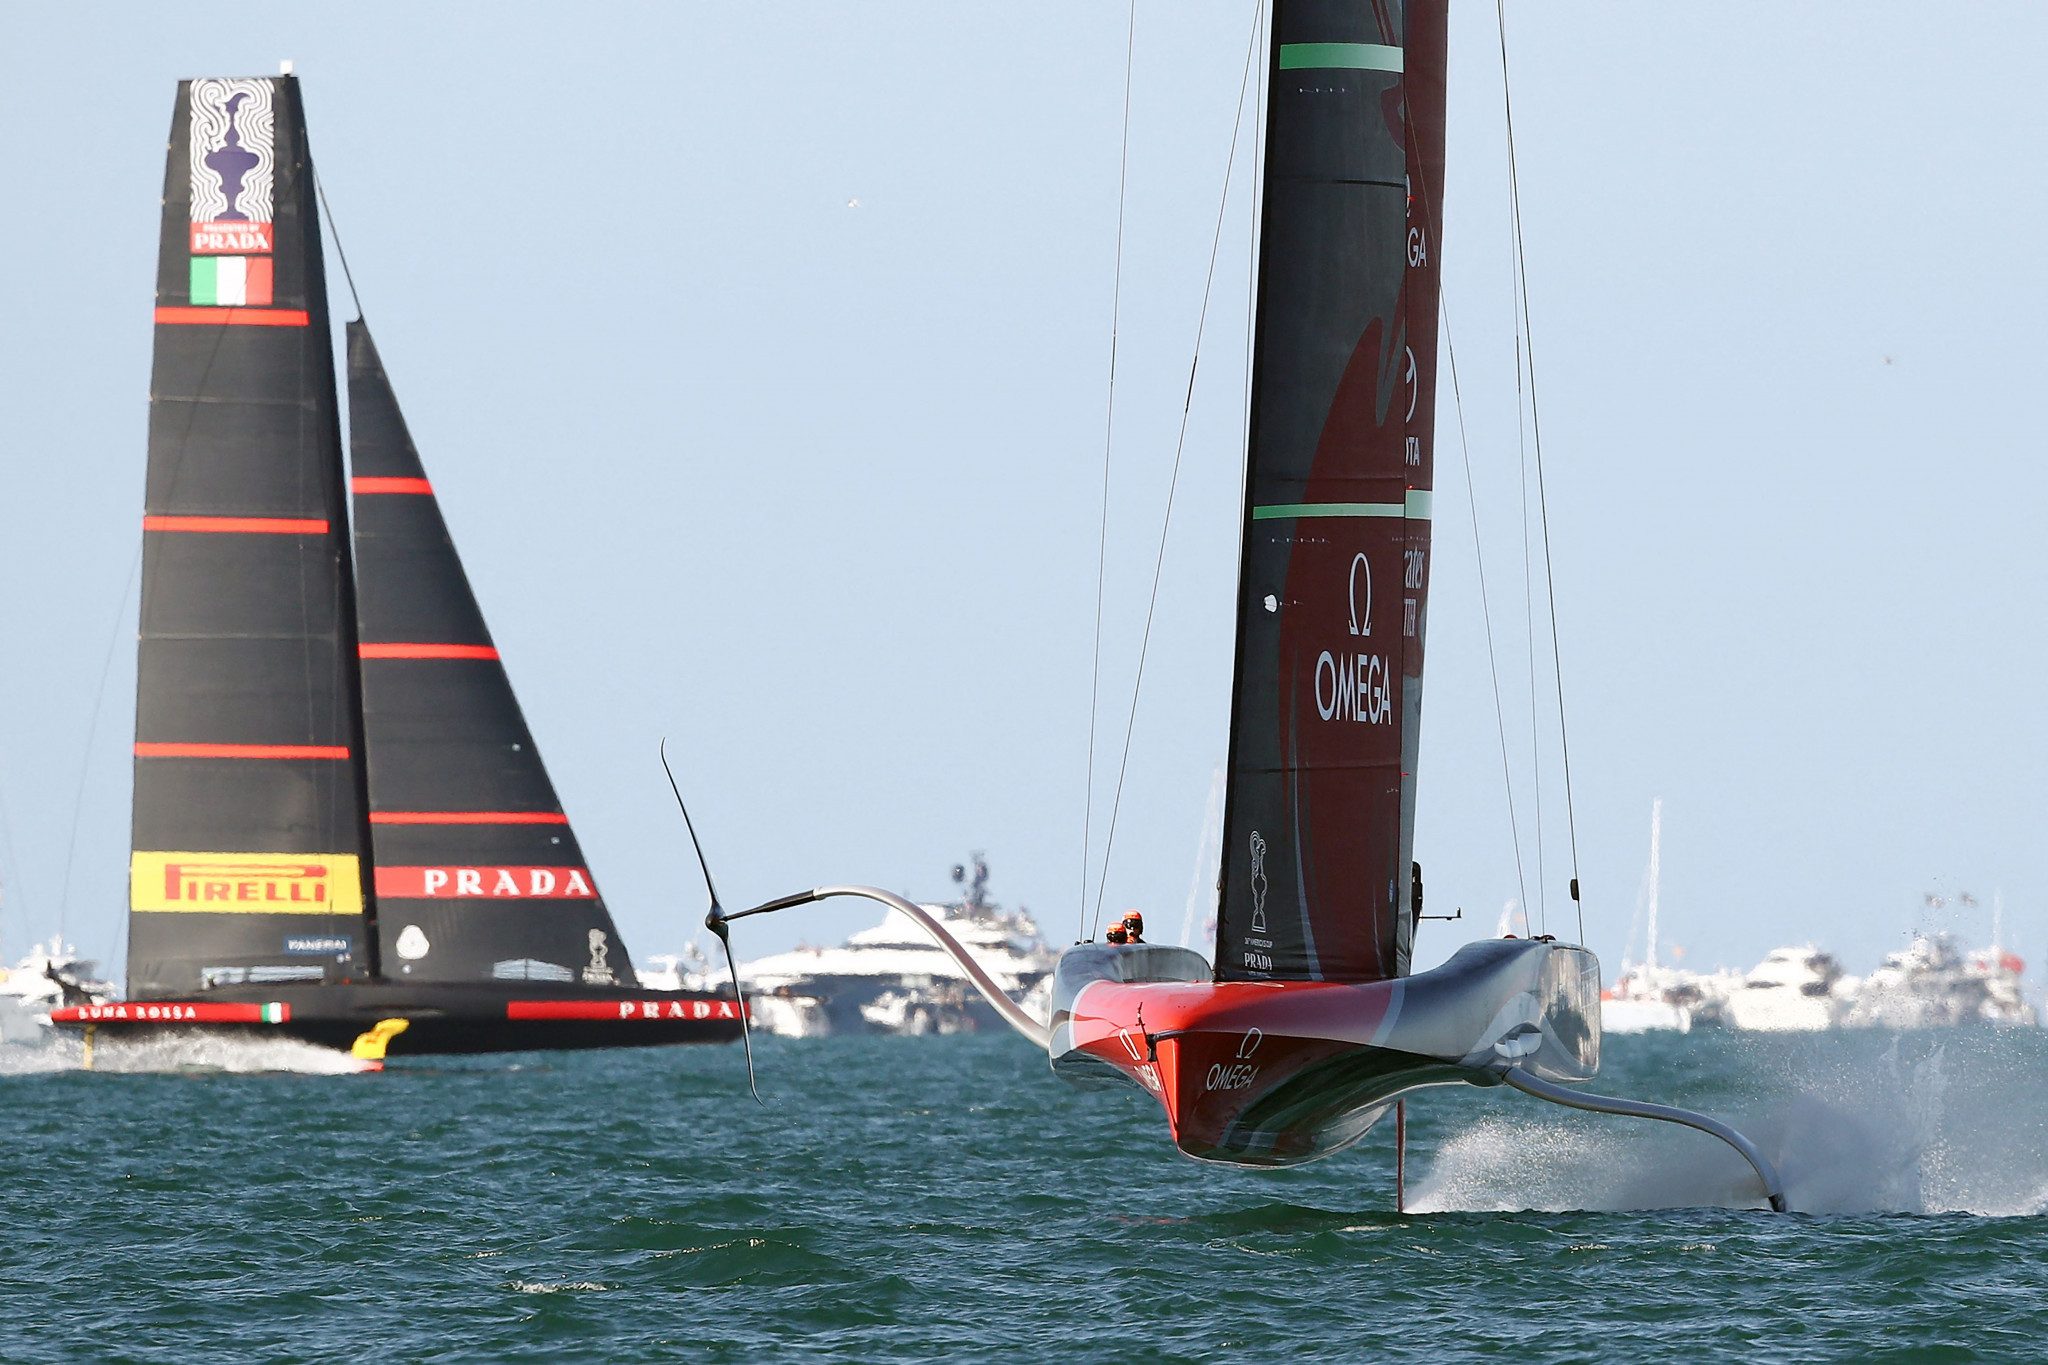 Team New Zealand and Luna Rossa level pegging in tussle to win America’s Cup